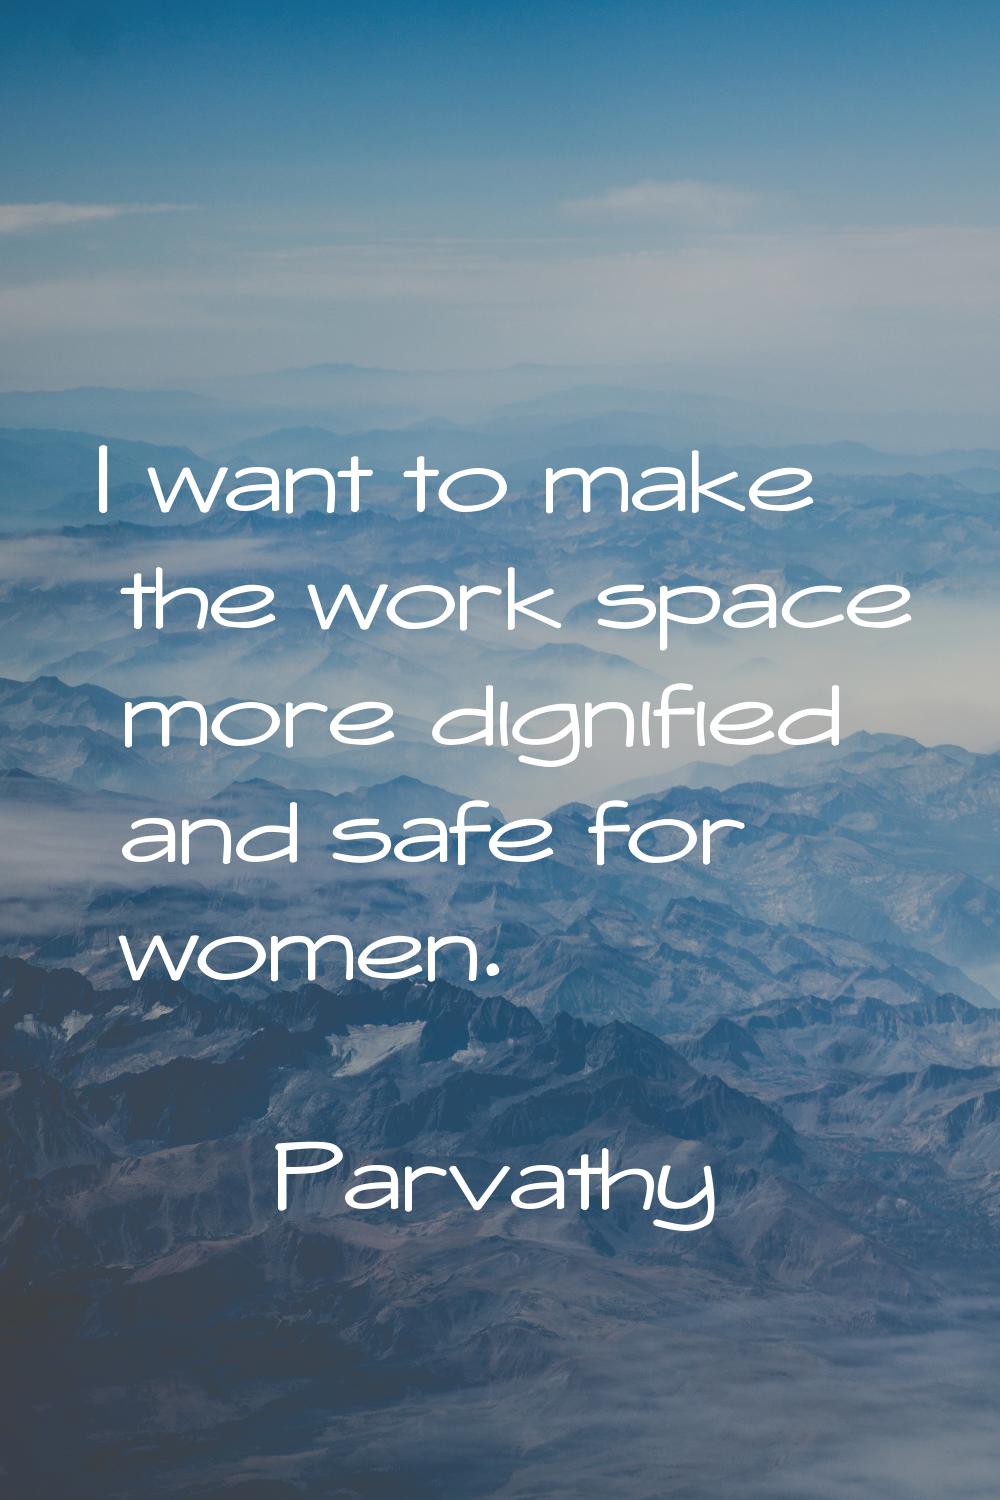 I want to make the work space more dignified and safe for women.